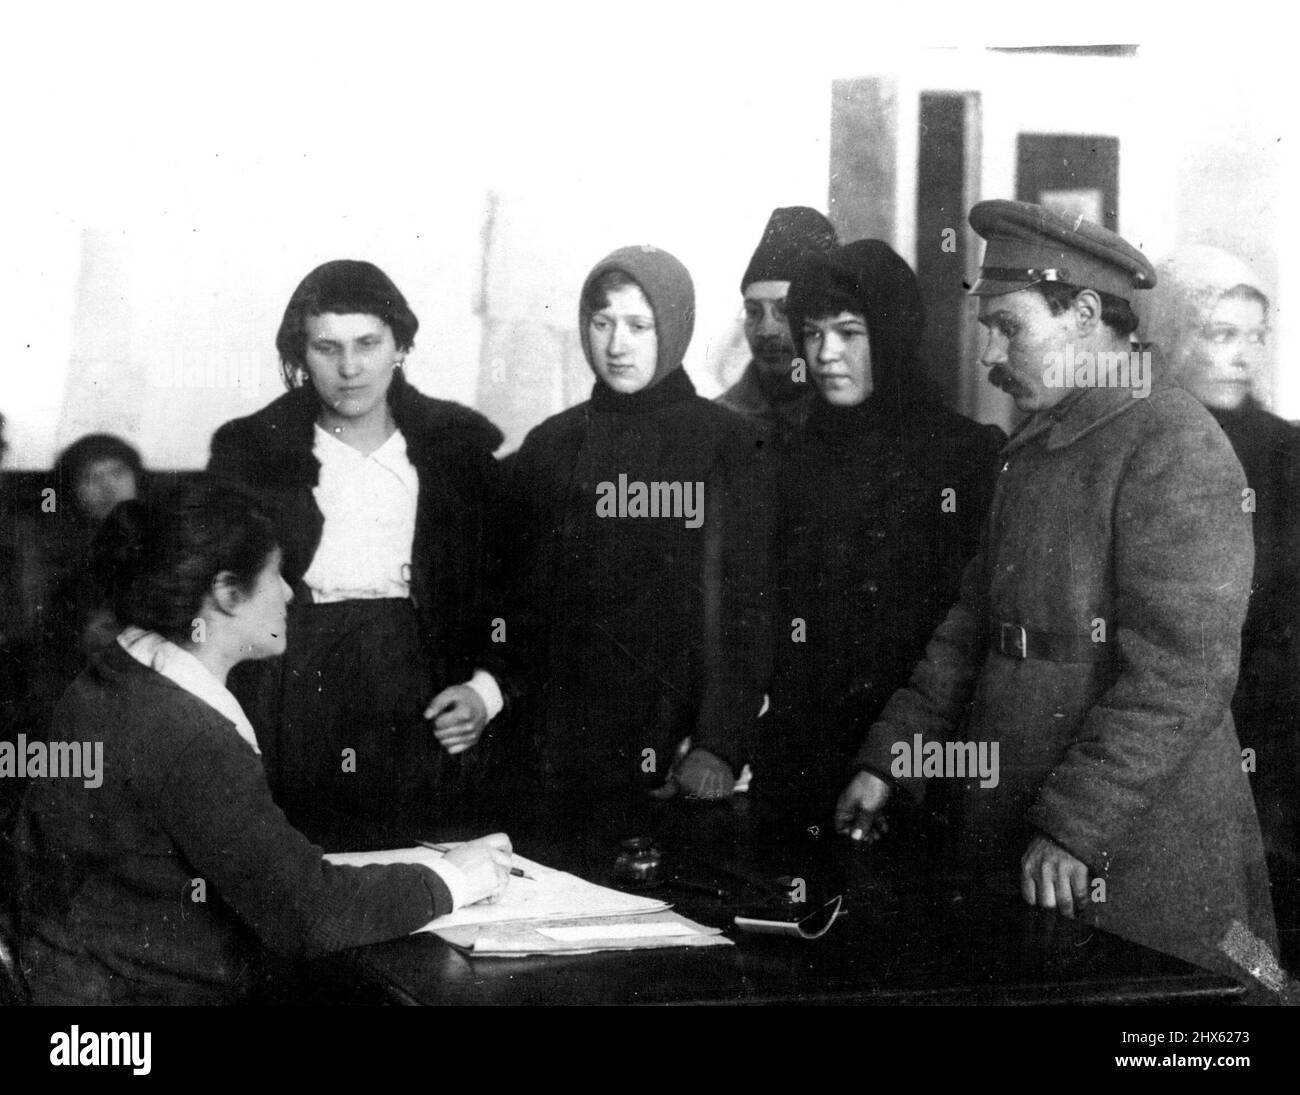 Scenes In Petrograd During The German Advance. Wives of the workmen enrolling as nurses for the front. June 11, 1918. (Photo by Daily Mirror).;Scenes In Petrograd During The German Advance. Wives of the workmen enrolling as nurses for the front. Stock Photo